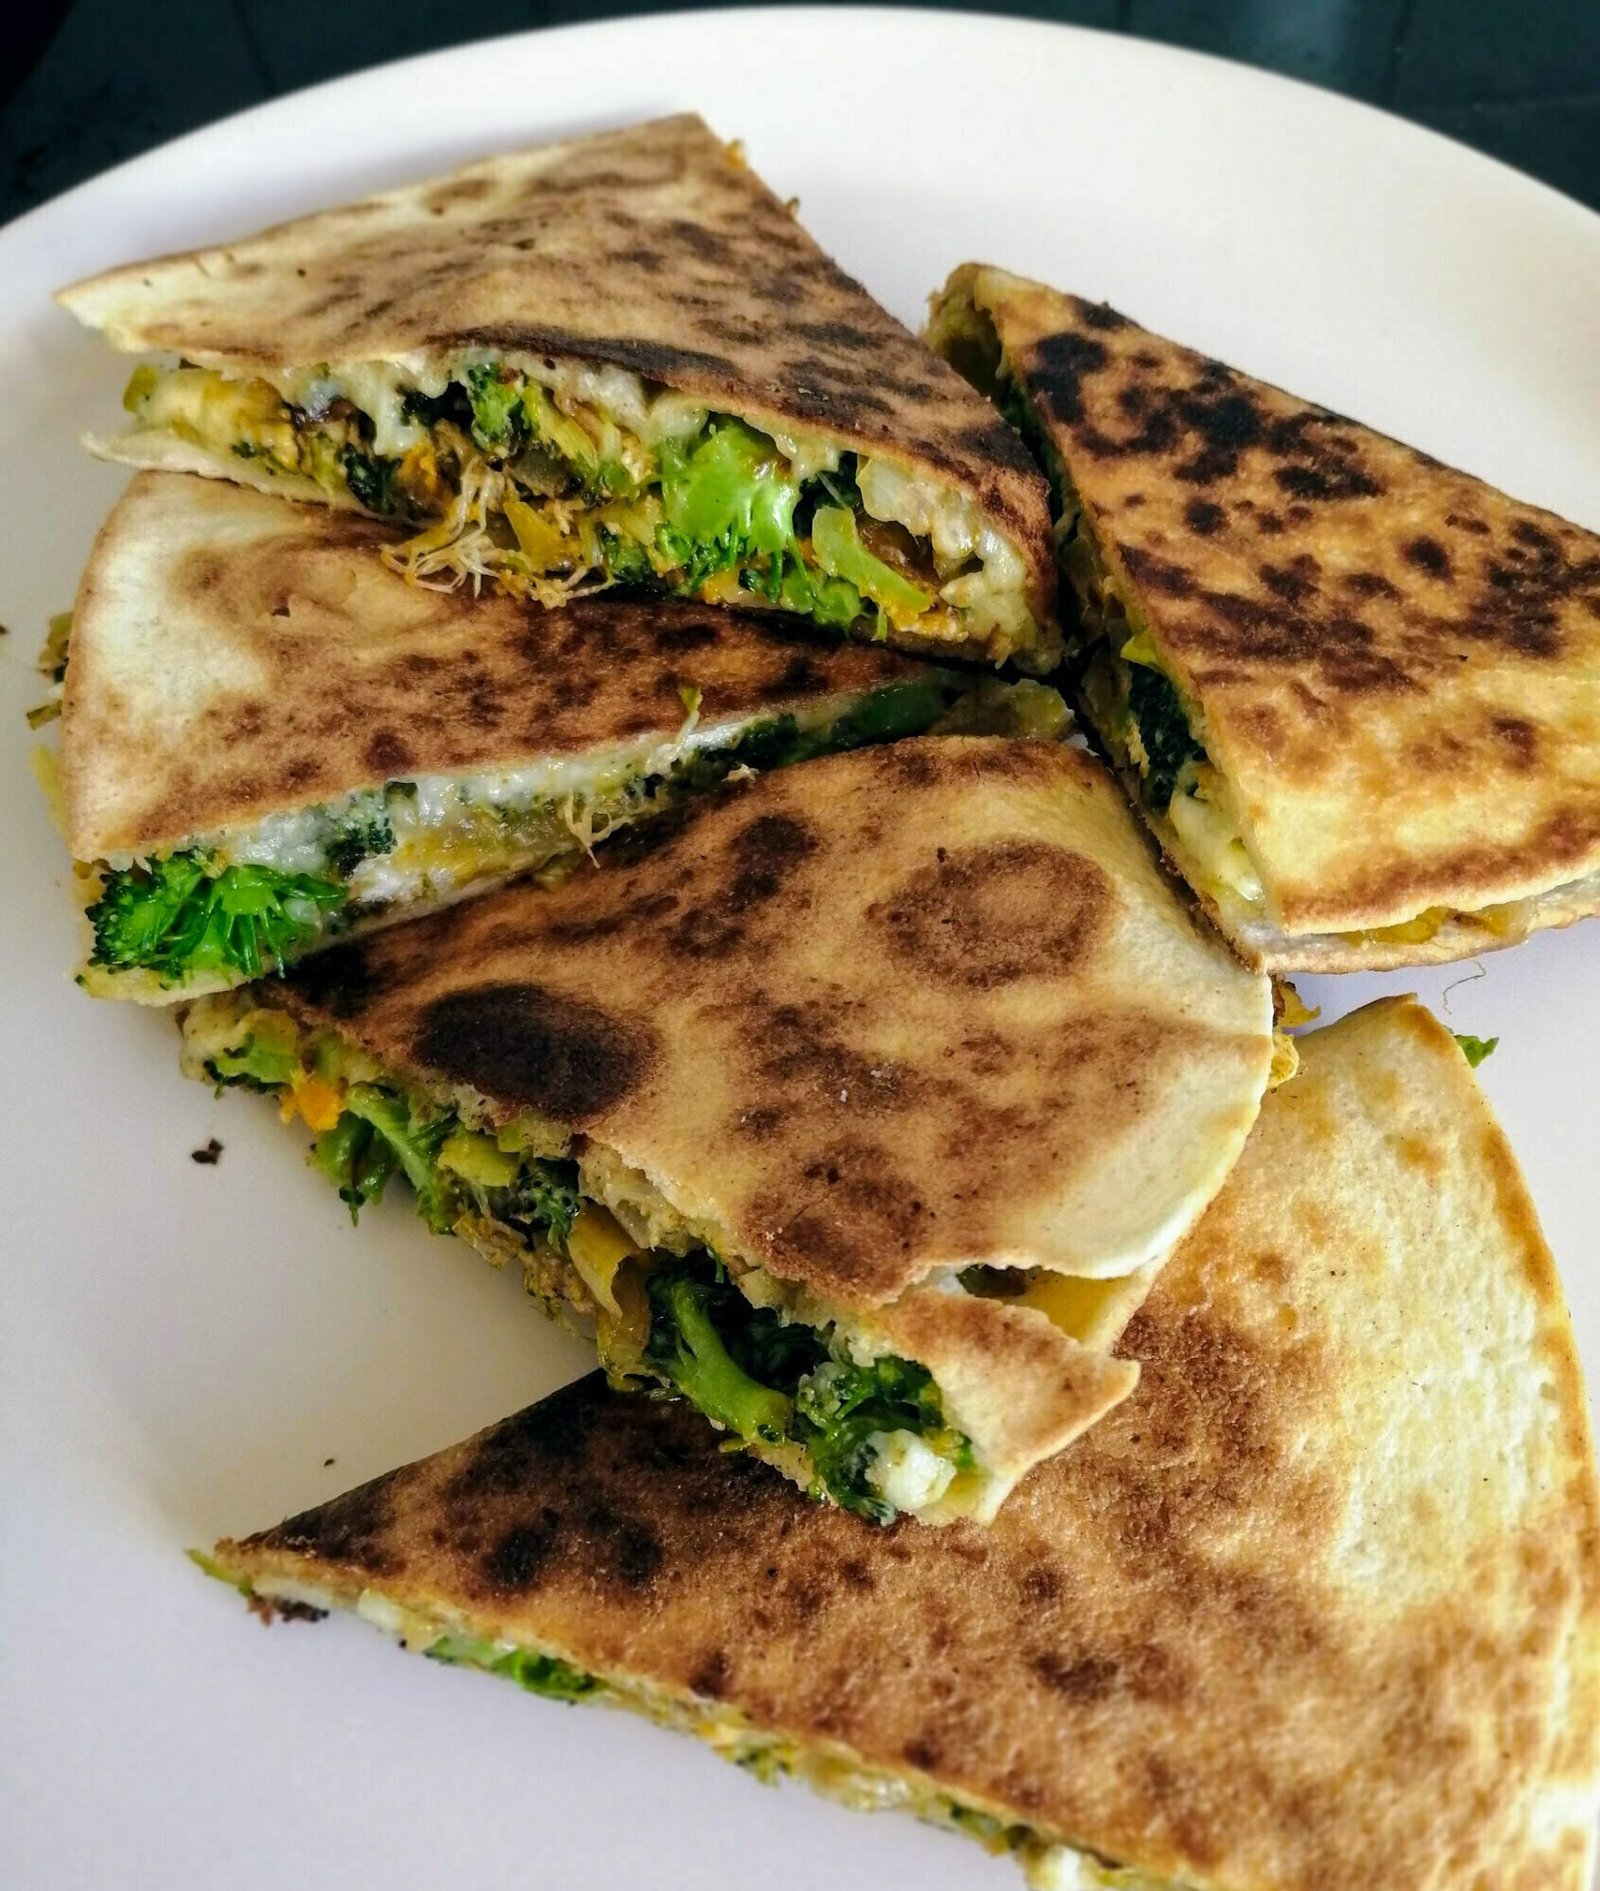 Leek, brocolli, and blue cheese quesadillas sit on a white plate